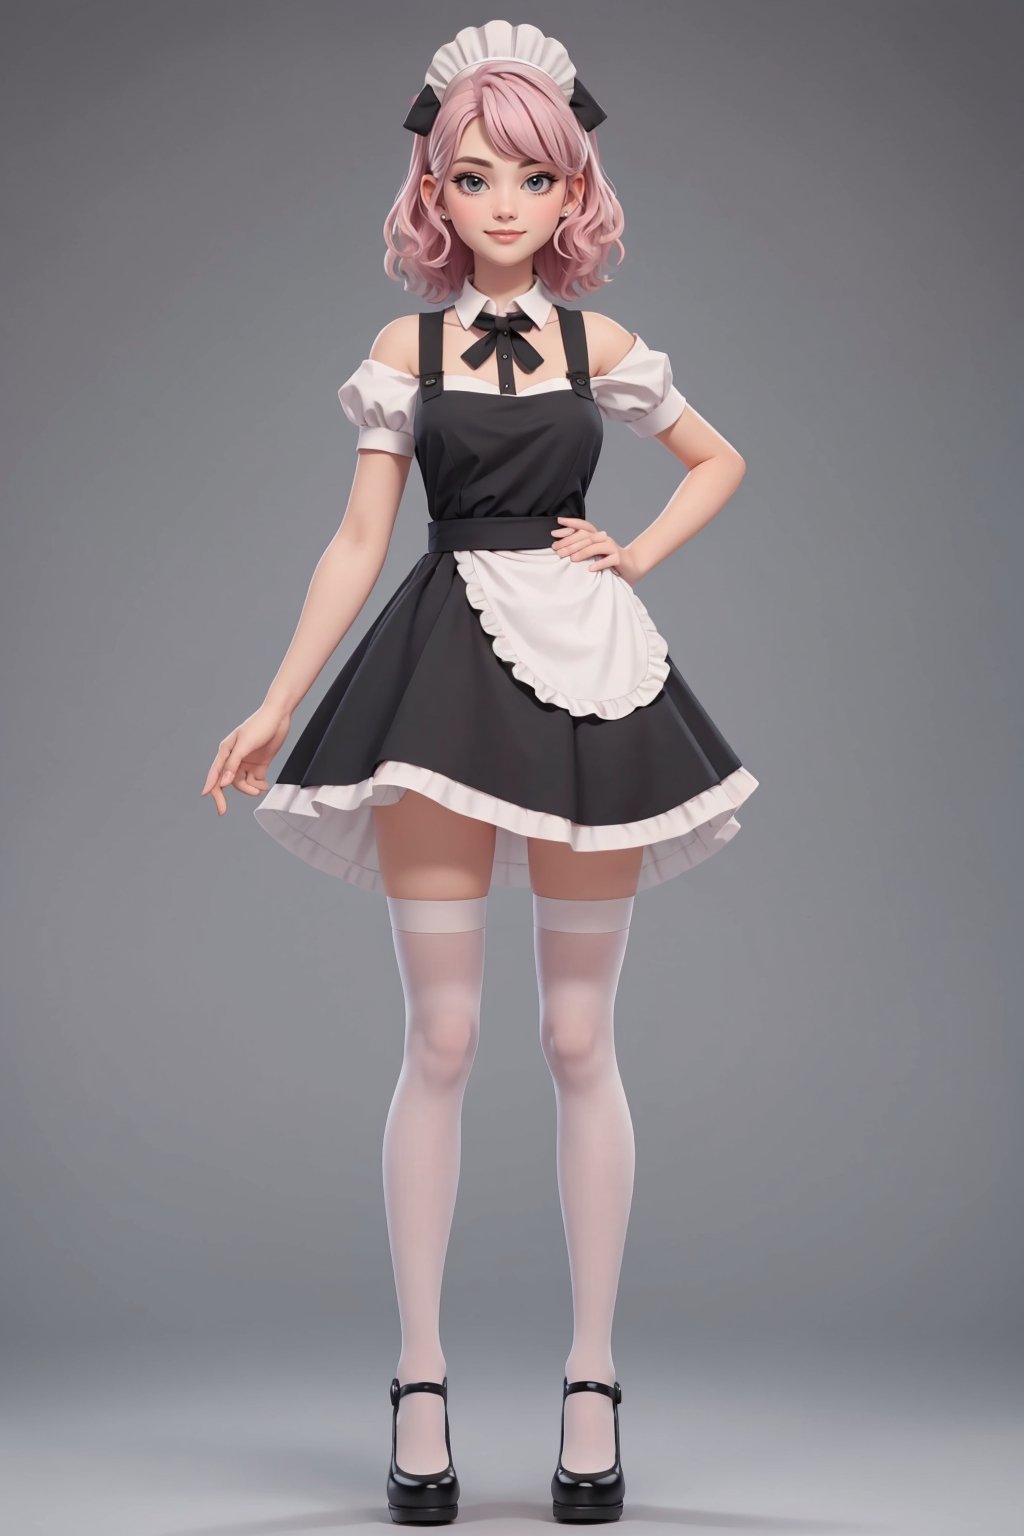 character sheet,looking to the camera,beautiful, good hands, full body, good body, 18 year old girl body,sexy pose, full_body,character_sheet, shoulder length fluffy semi wavy hair, pink hair,maid clothes, white stockings, greeting pose,maid black shoes, good geometry